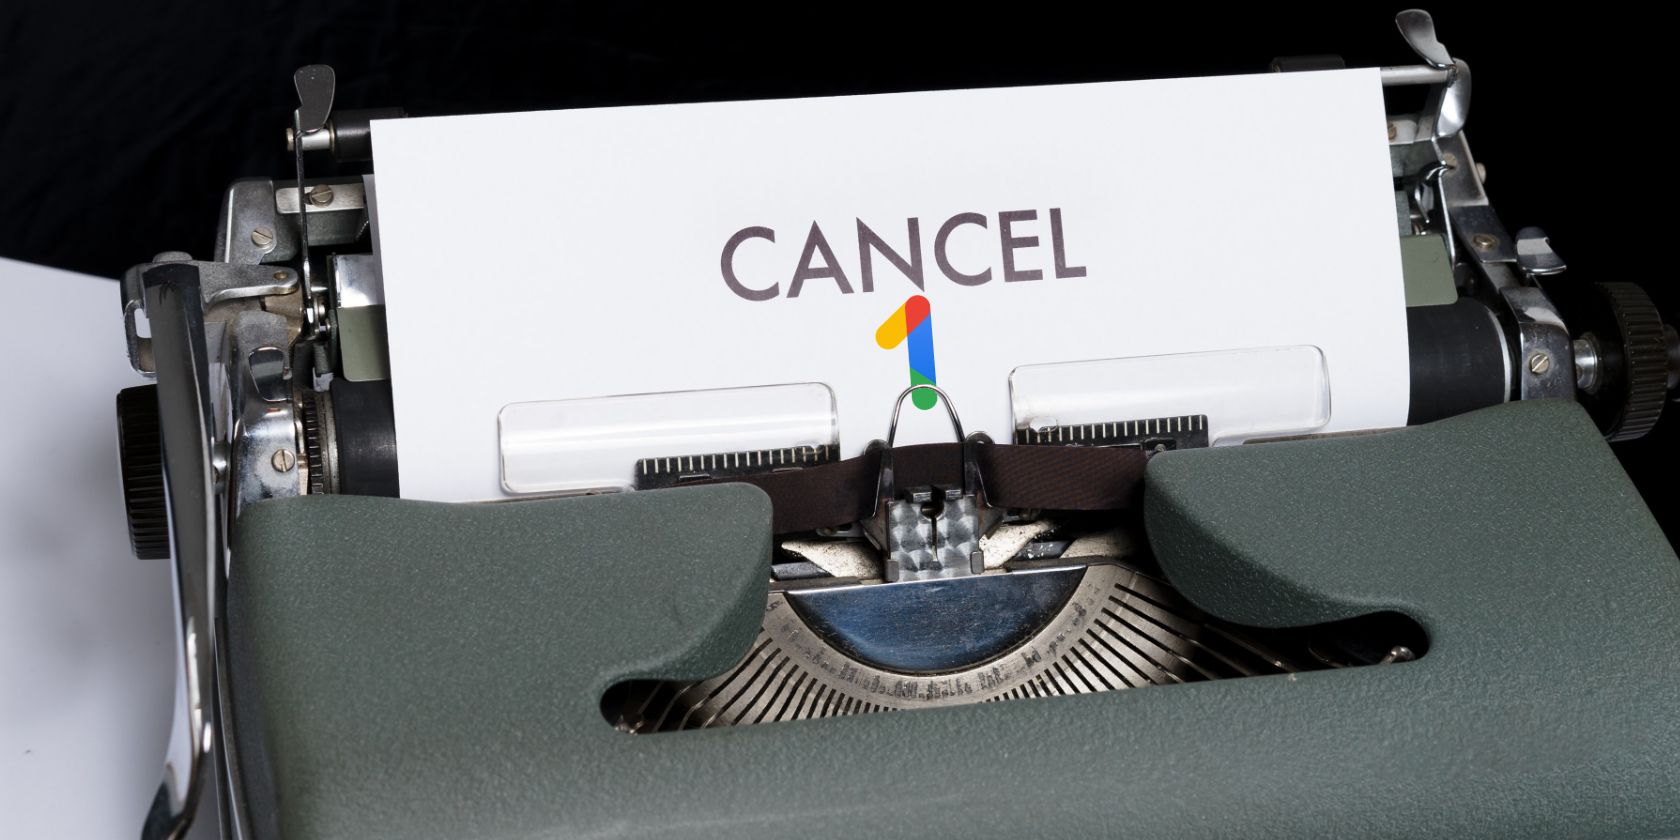 Typewriter with the word Cancel and the Google One logo.